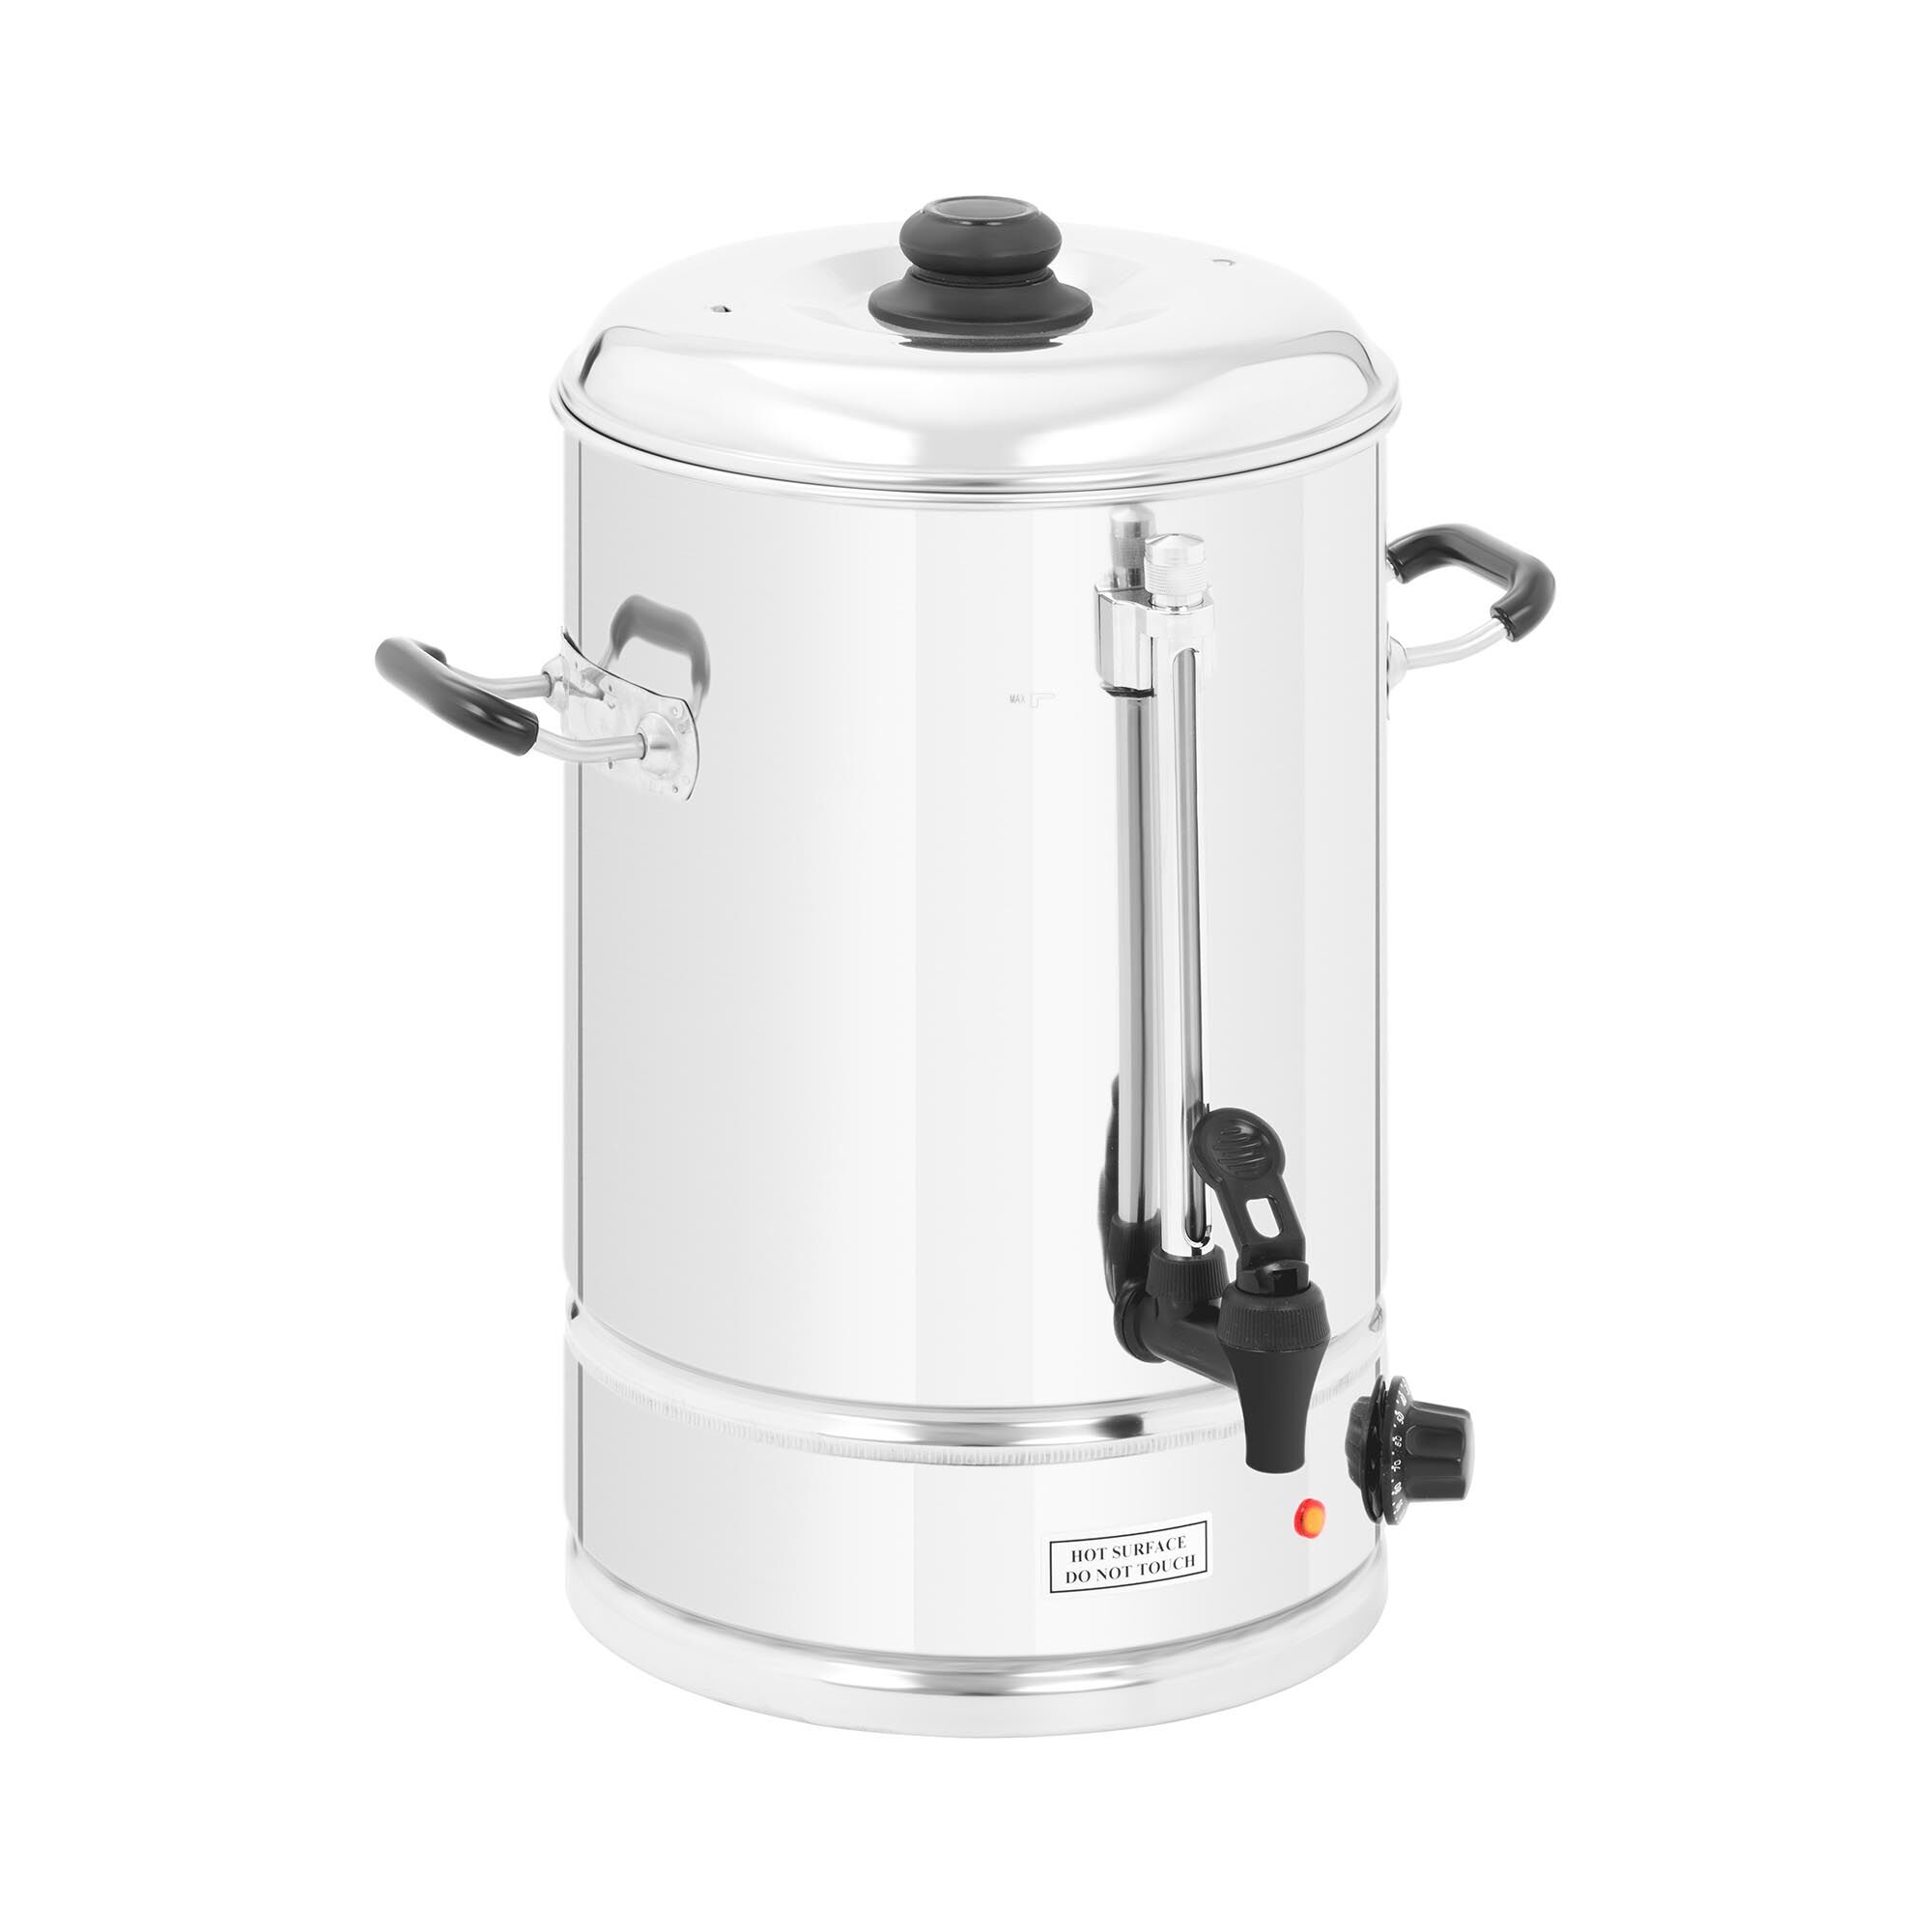 Royal Catering Hot Water Dispenser - 15 litres - 2,500 W RCWK-15L